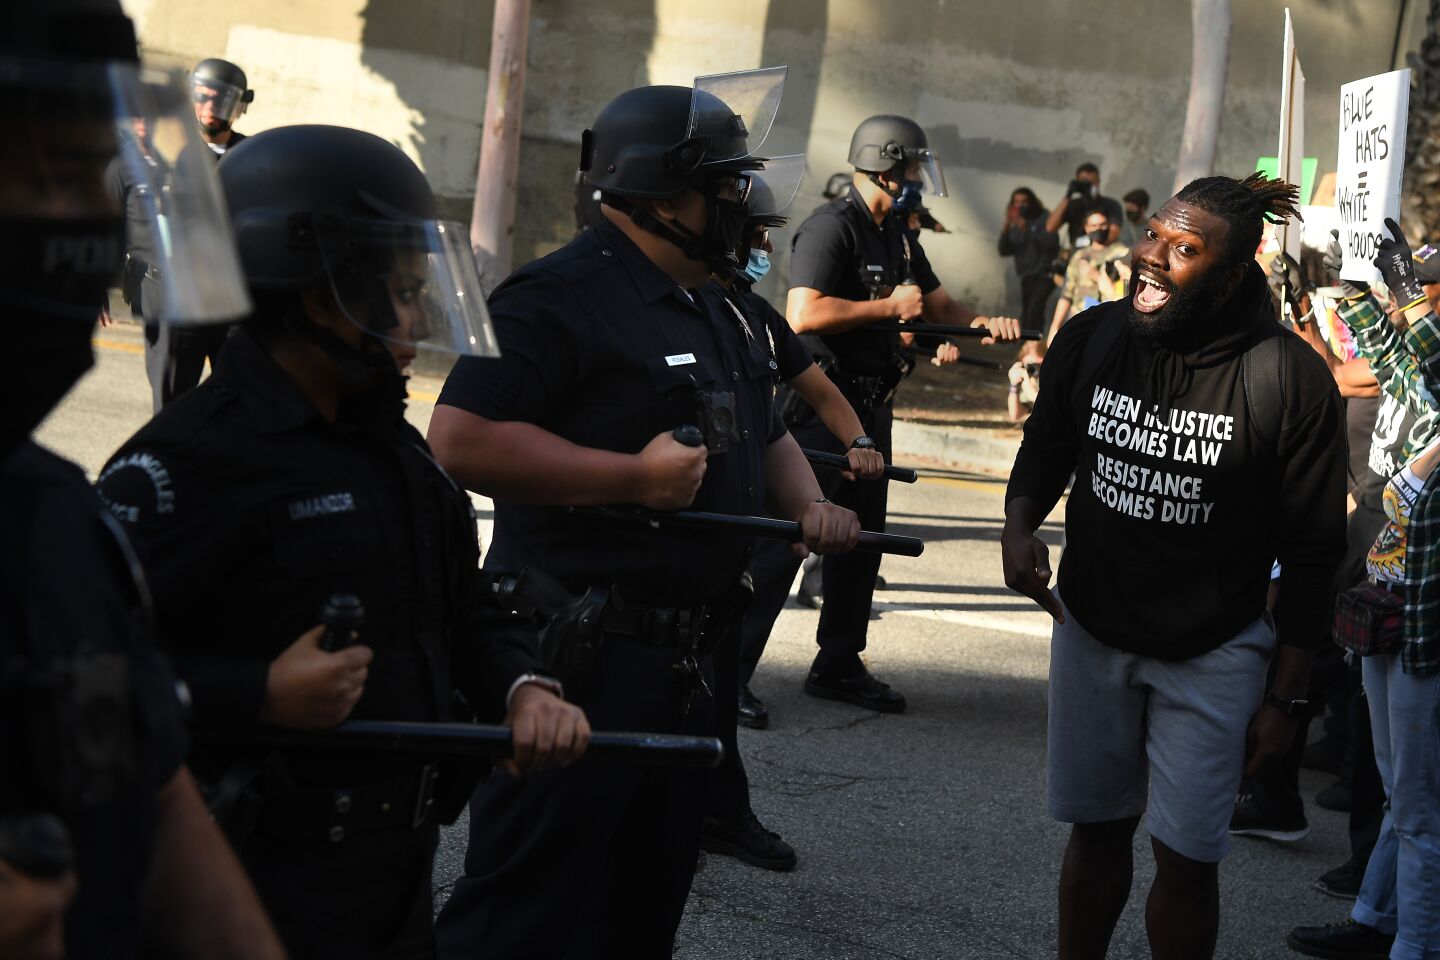 A protester confronts LAPD officers on May 29 in downtown L.A.